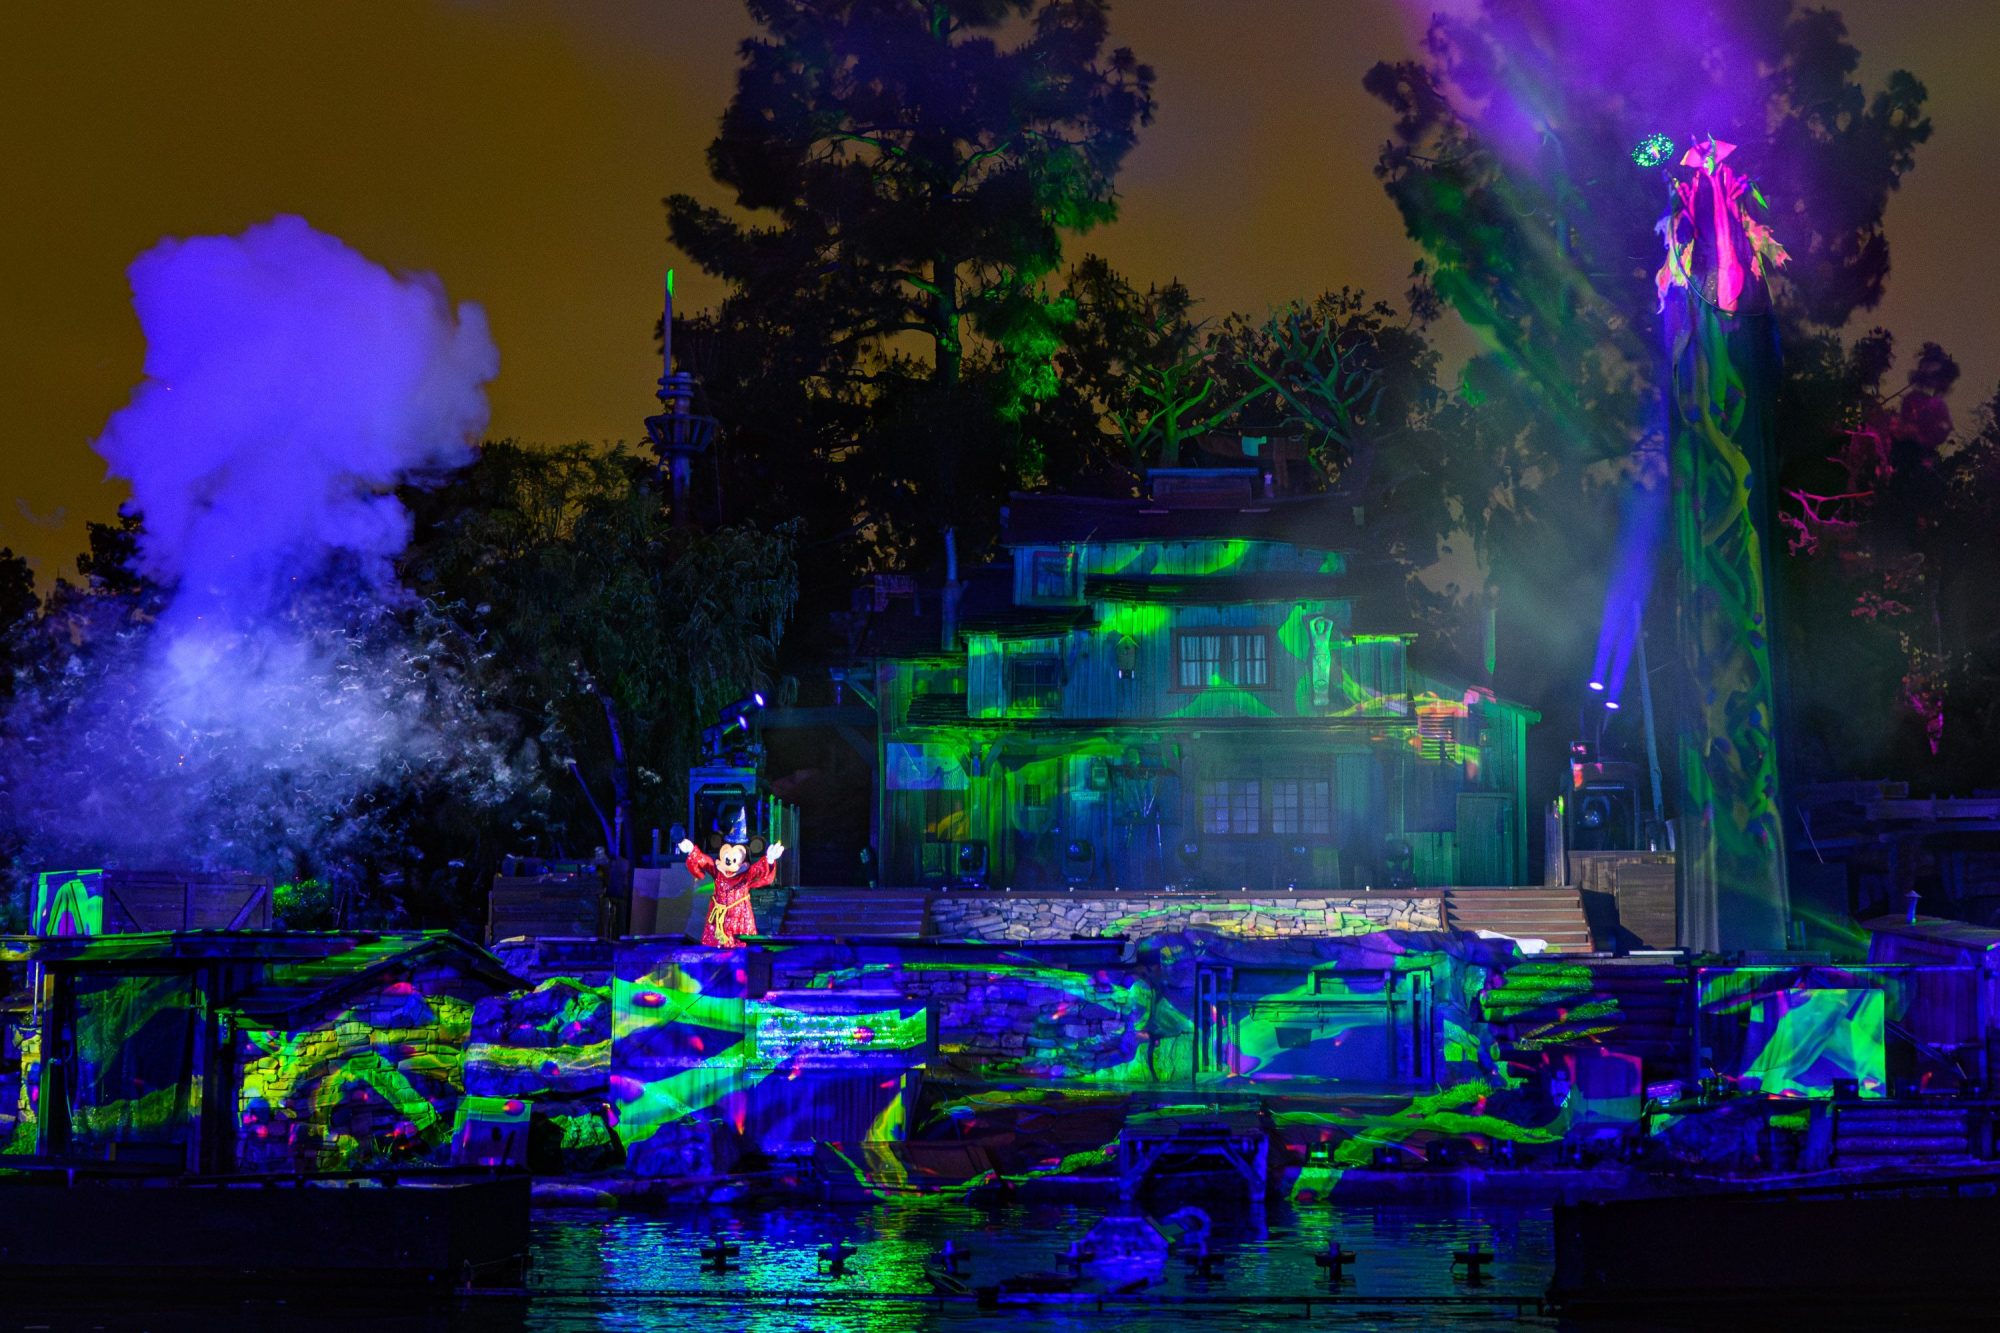 The "Fantasmic" nighttime spectacular returns to the Rivers of America at Disneyland after a yearlong hiatus due to a fire. (Disneyland)